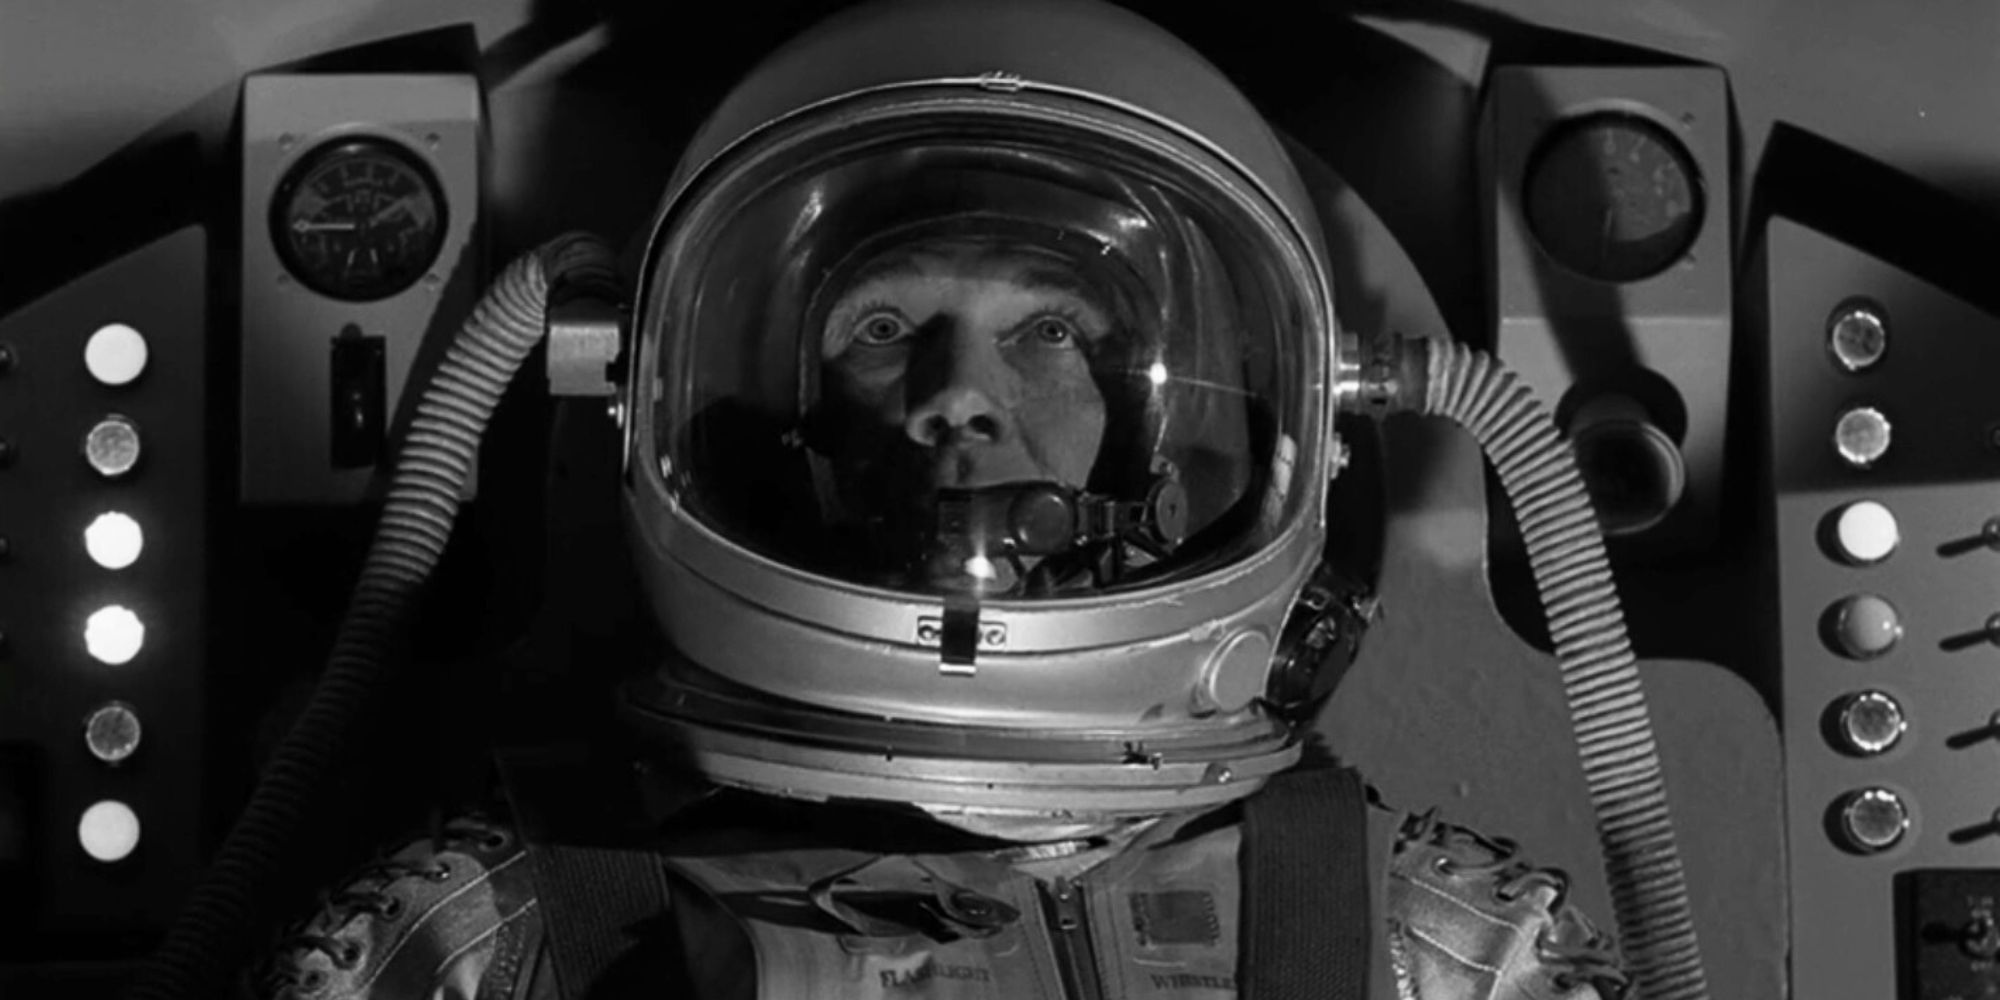 Steve Forrest wearing an astronaut uniform while sitting in a spacecraft in The Twilight Zone